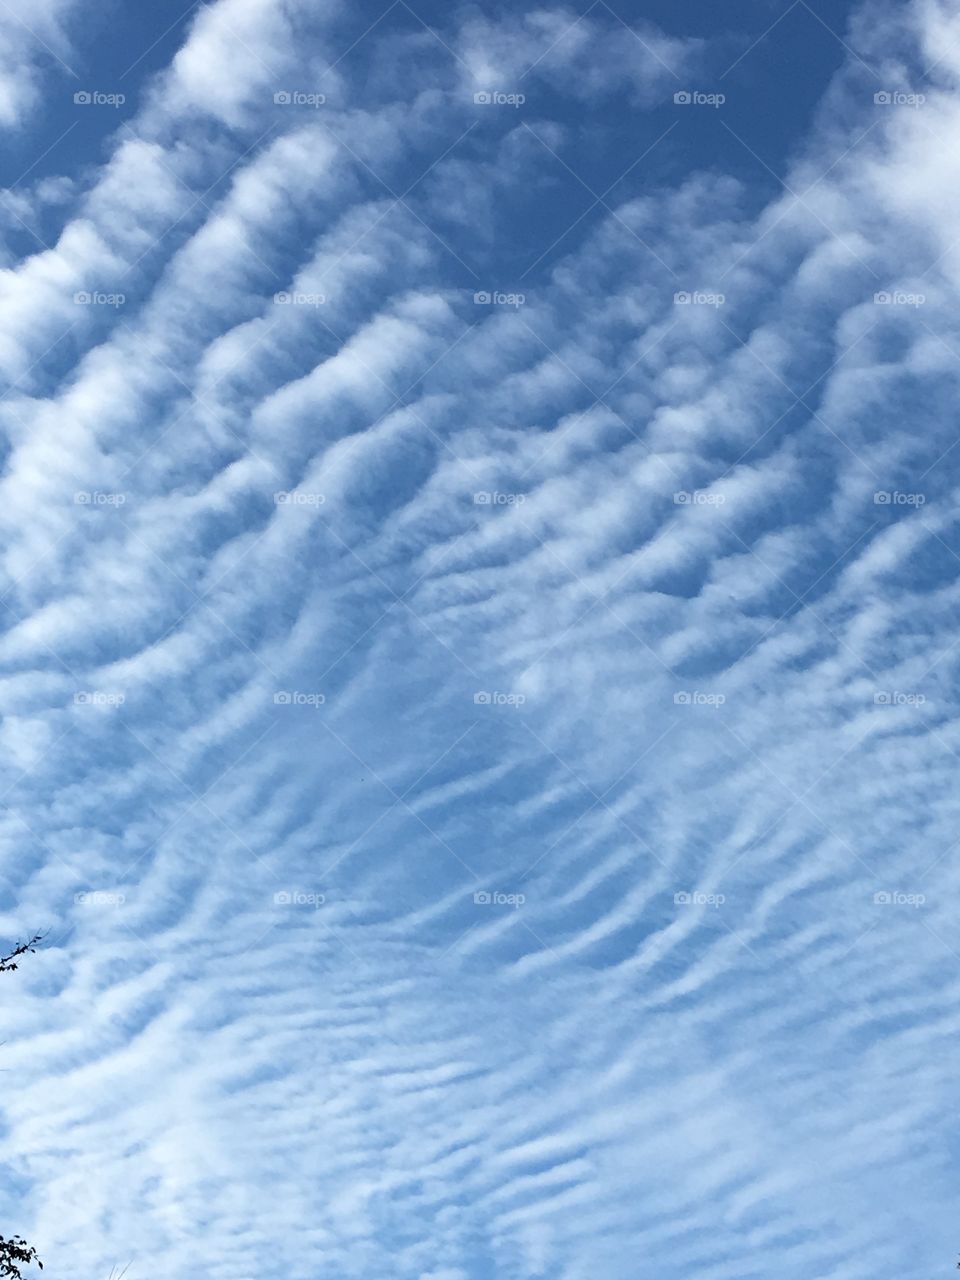 Cloud with ripples like water